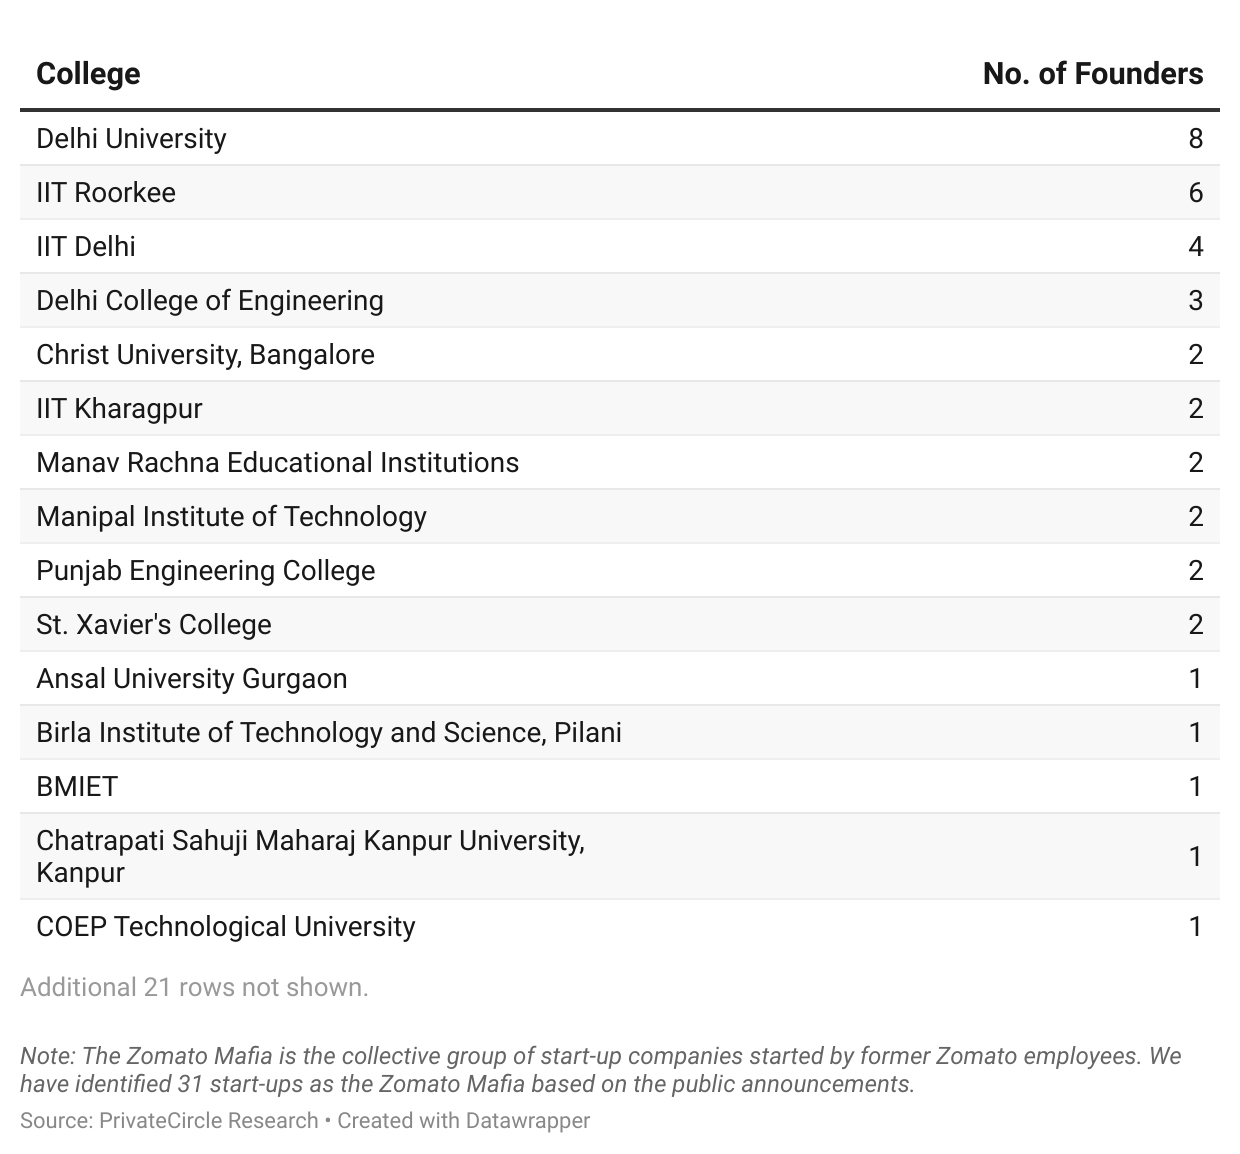 Zomato Mafia 2024: Founders' Alma Mater.

14 out of the 59 founders, 24% of the Zomato Mafia have graduated from IITs. Out of these 14 founders, majority 4 are from IIT Delhi, which is also the alma-mater of Zomato co-founders Deepinder Goyal and Pankaj Chaddah.